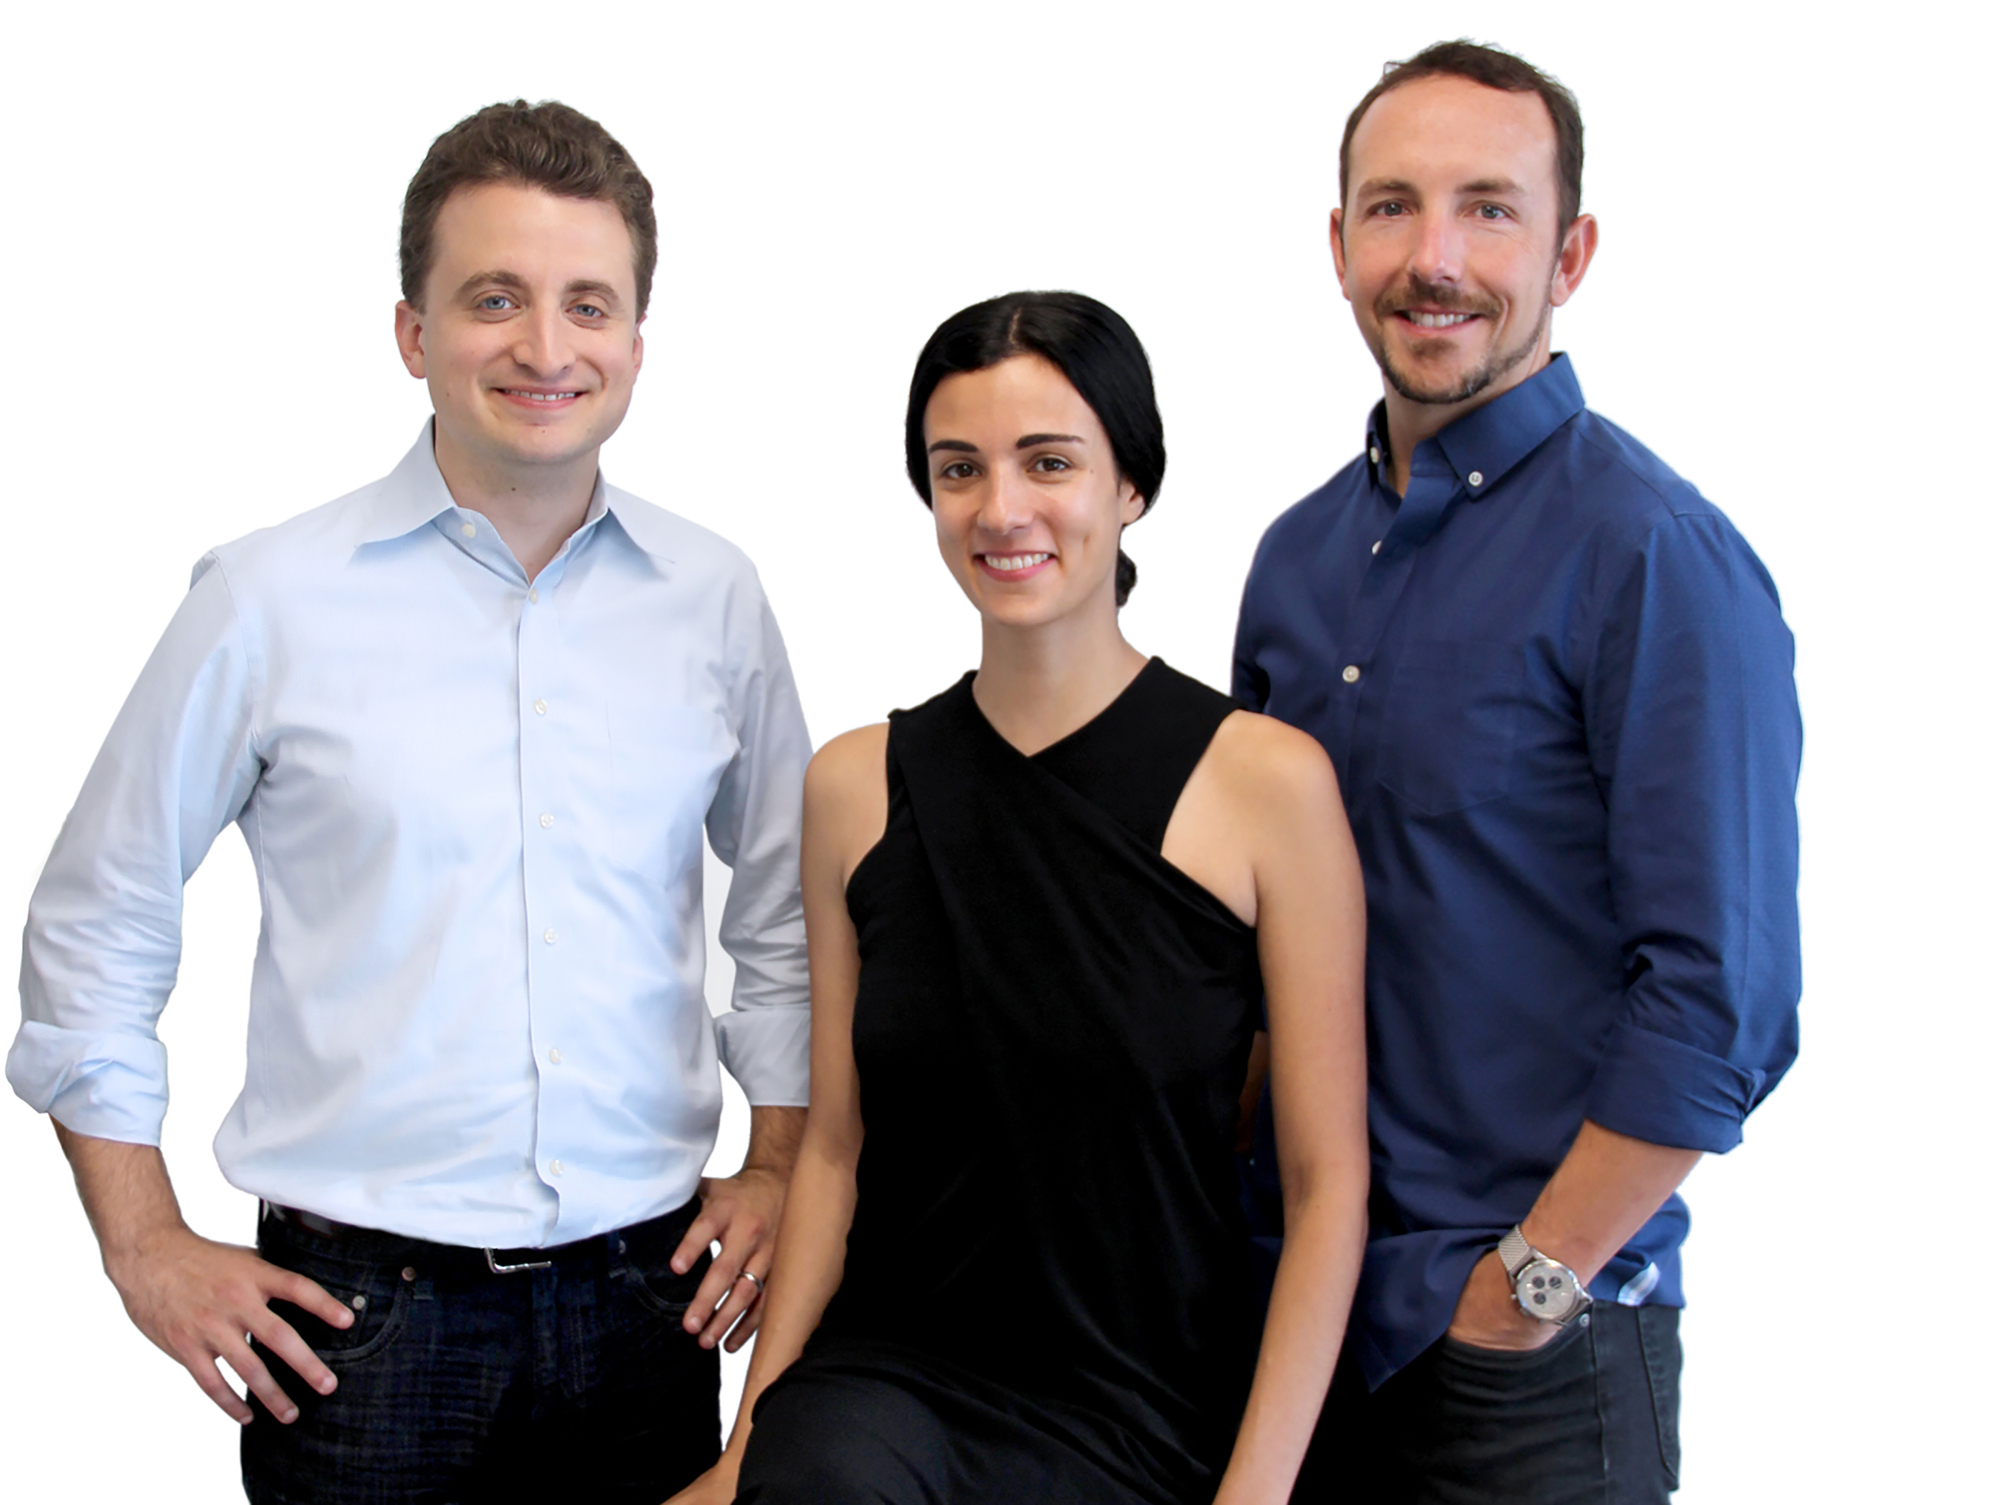 From left, Jay Goldklang, Abigail Besdin and David Diaz founded Great Jones in 2016 with a goal of revolutionizing residential property management through technology. Courtesy Great Jones